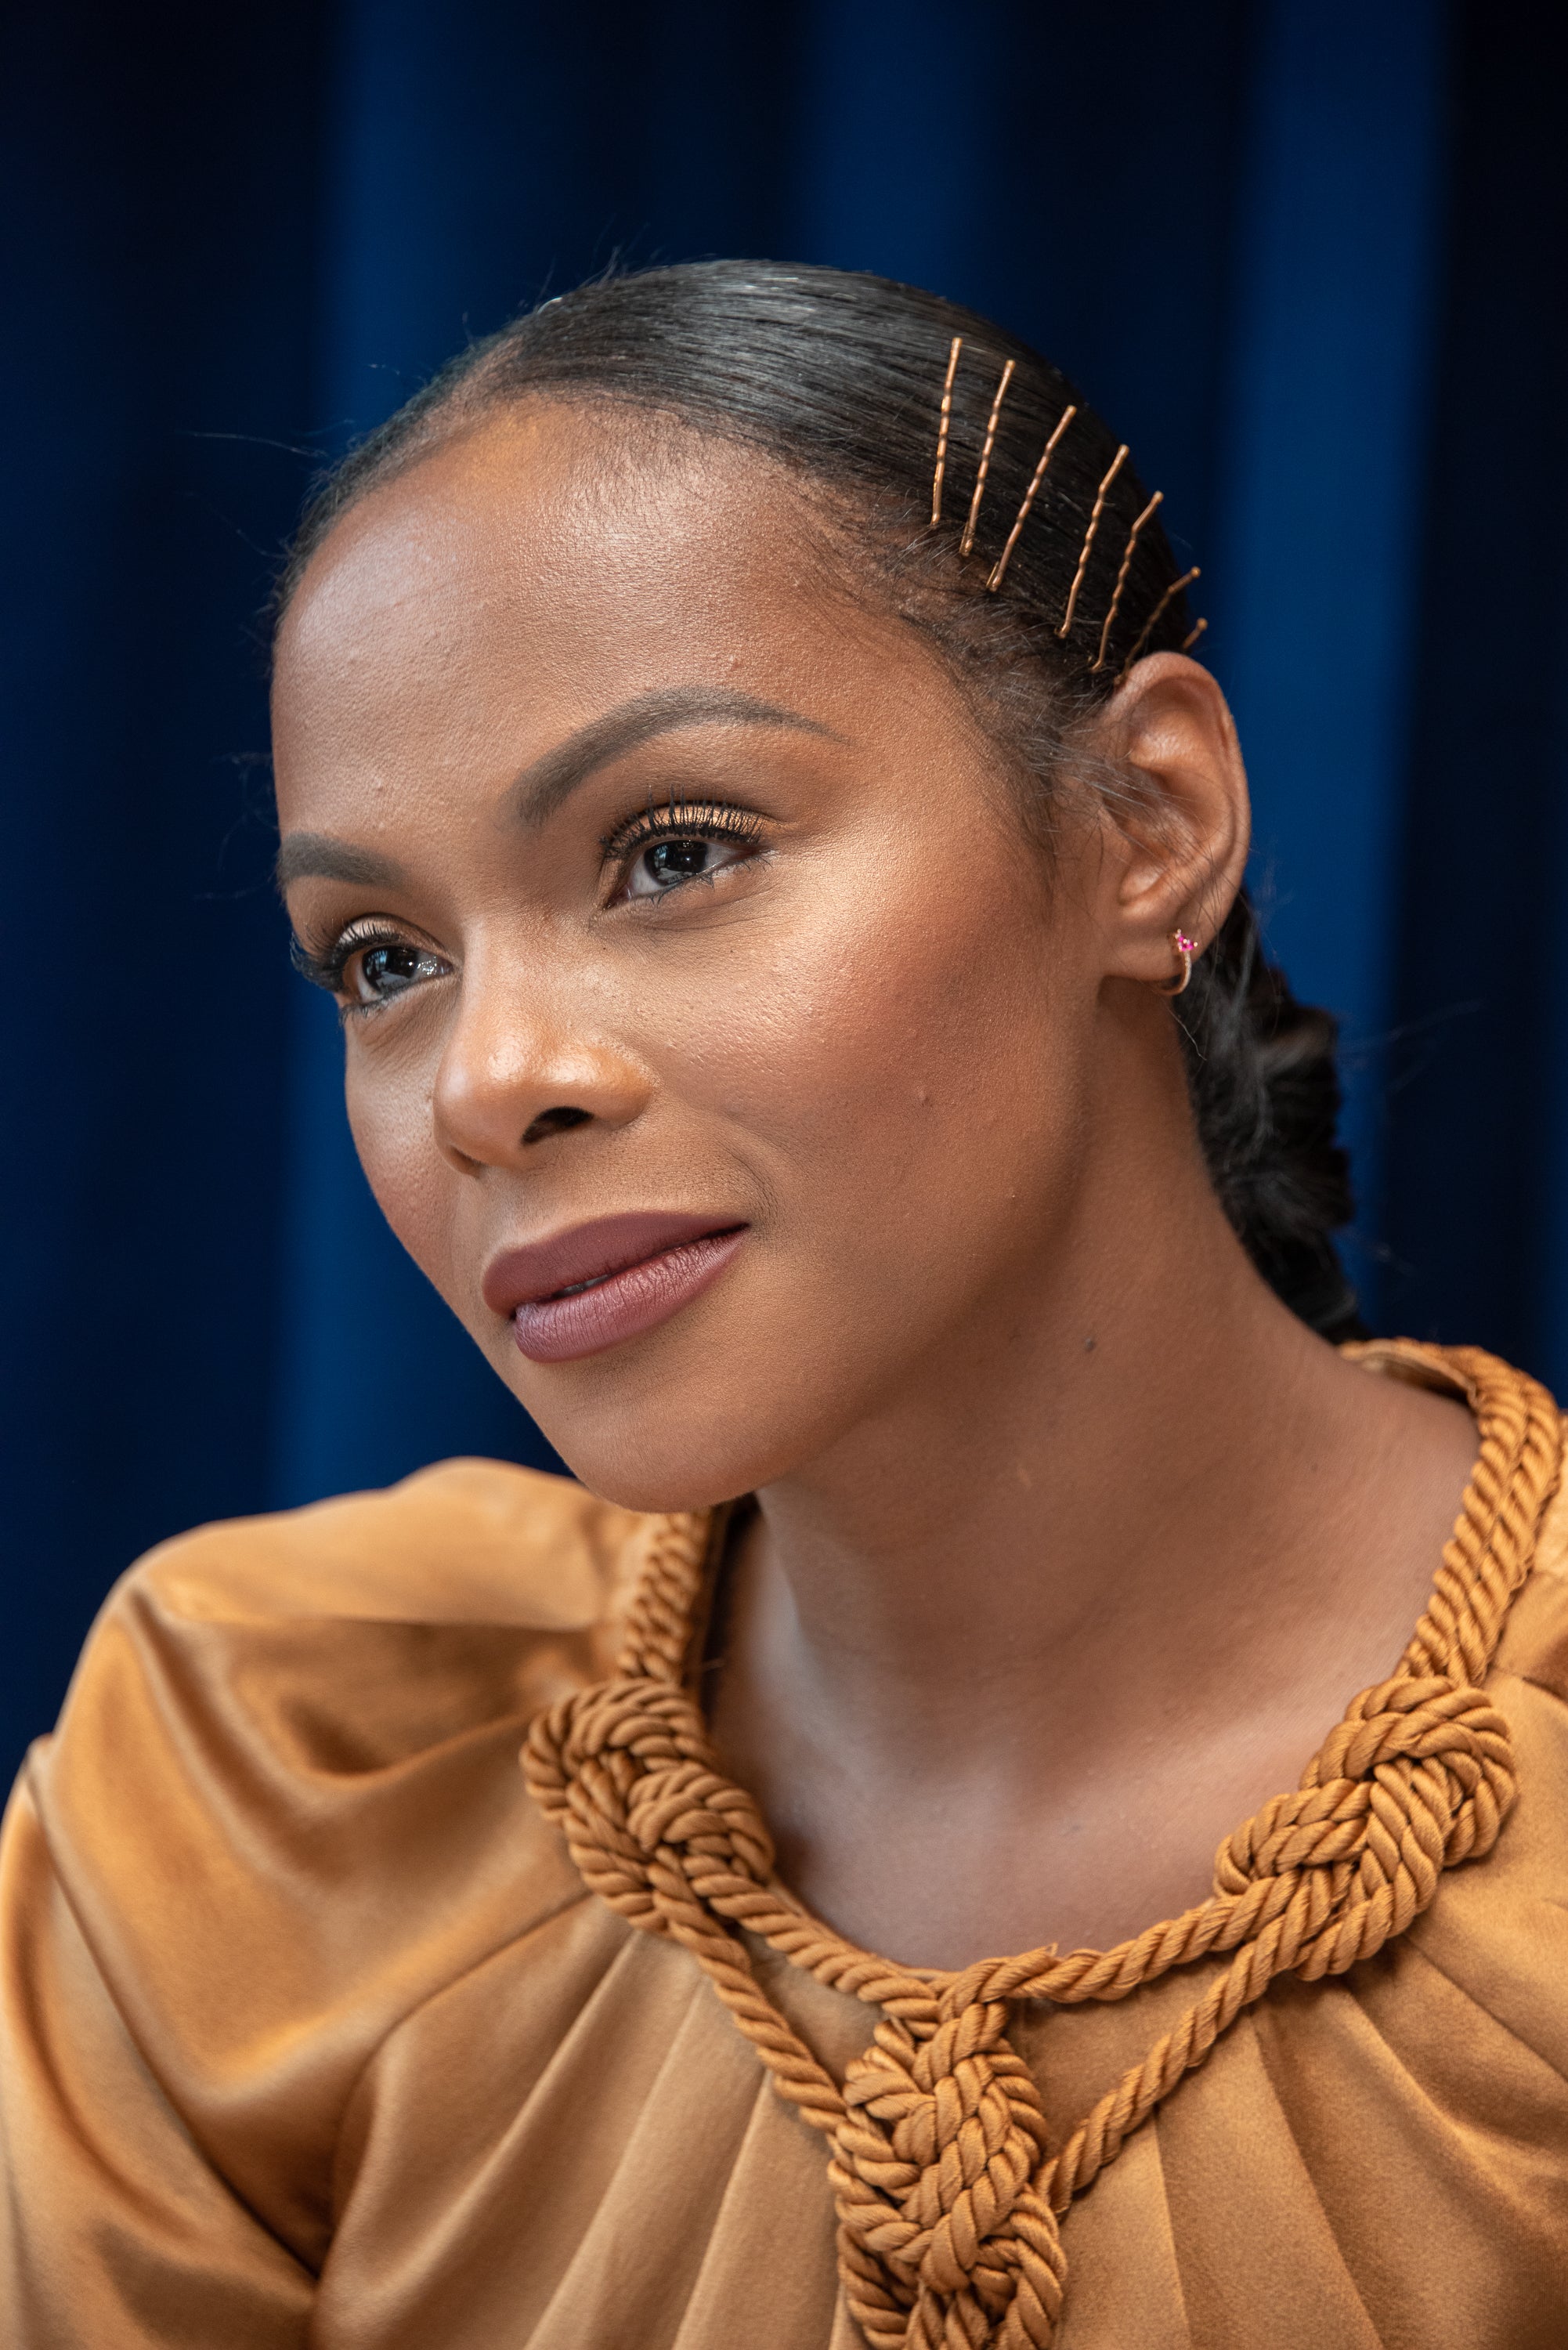 Tika Sumpter Is A ‘Mixed-ish’ Beauty We Can’t Get Enough Of